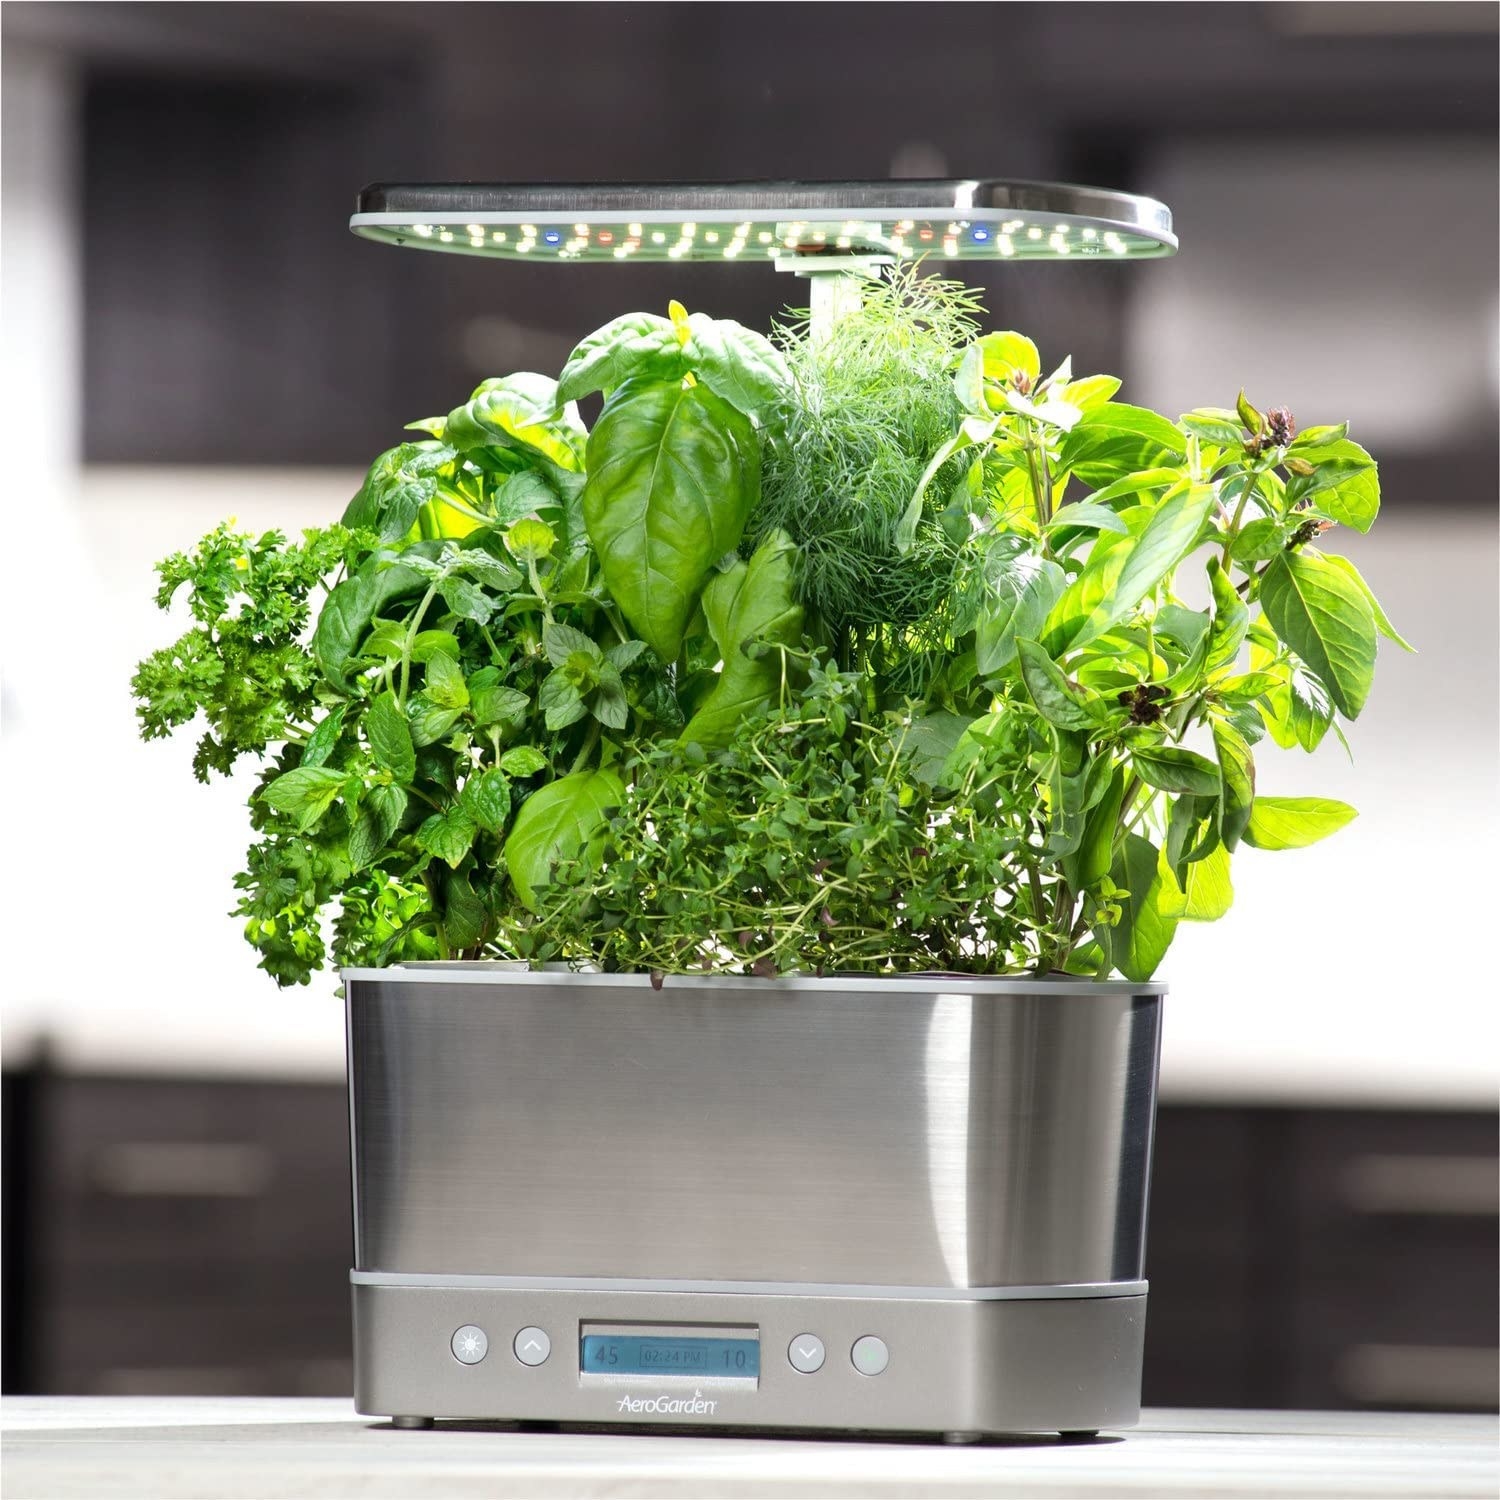 the smart garden filled with healthy herbs